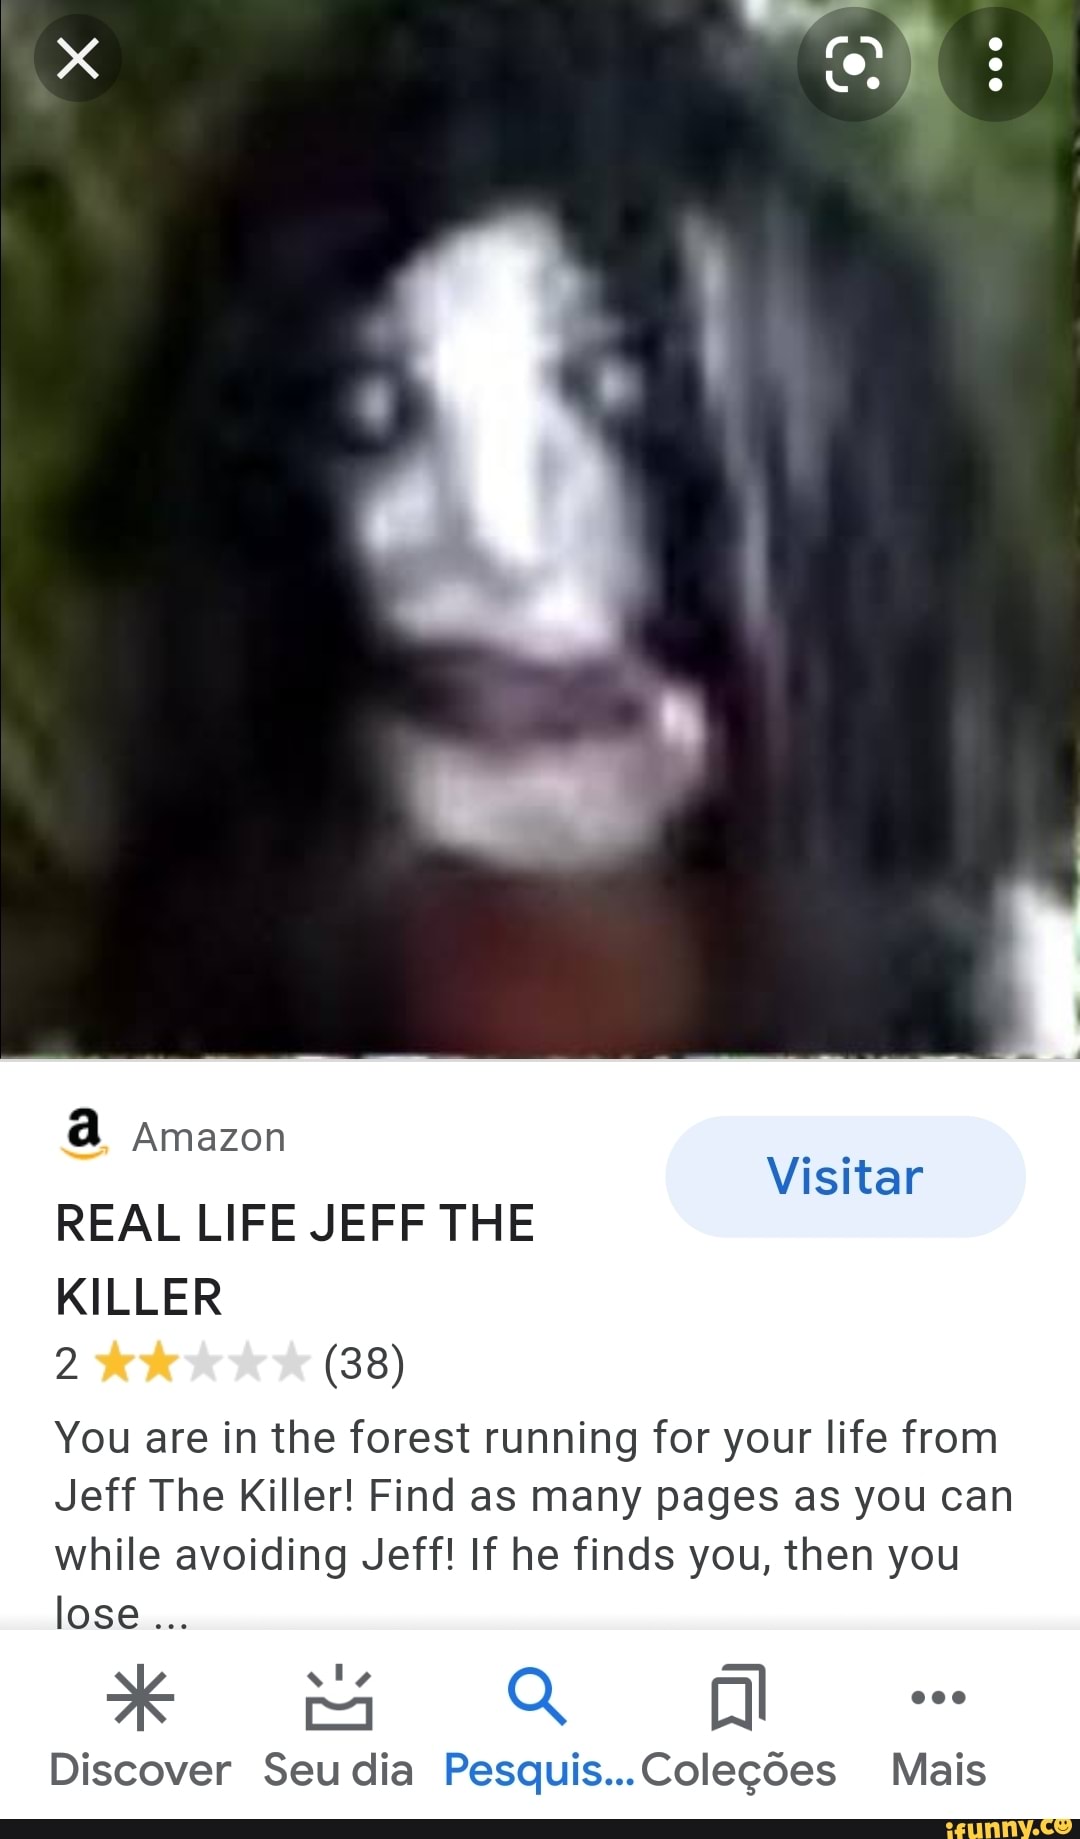 A  REAL LIFE JEFF THE KILLER 2 (38) Visitar You are in the forest  running for your life from Jeff The Killer! Find as many pages as you can  while avoiding